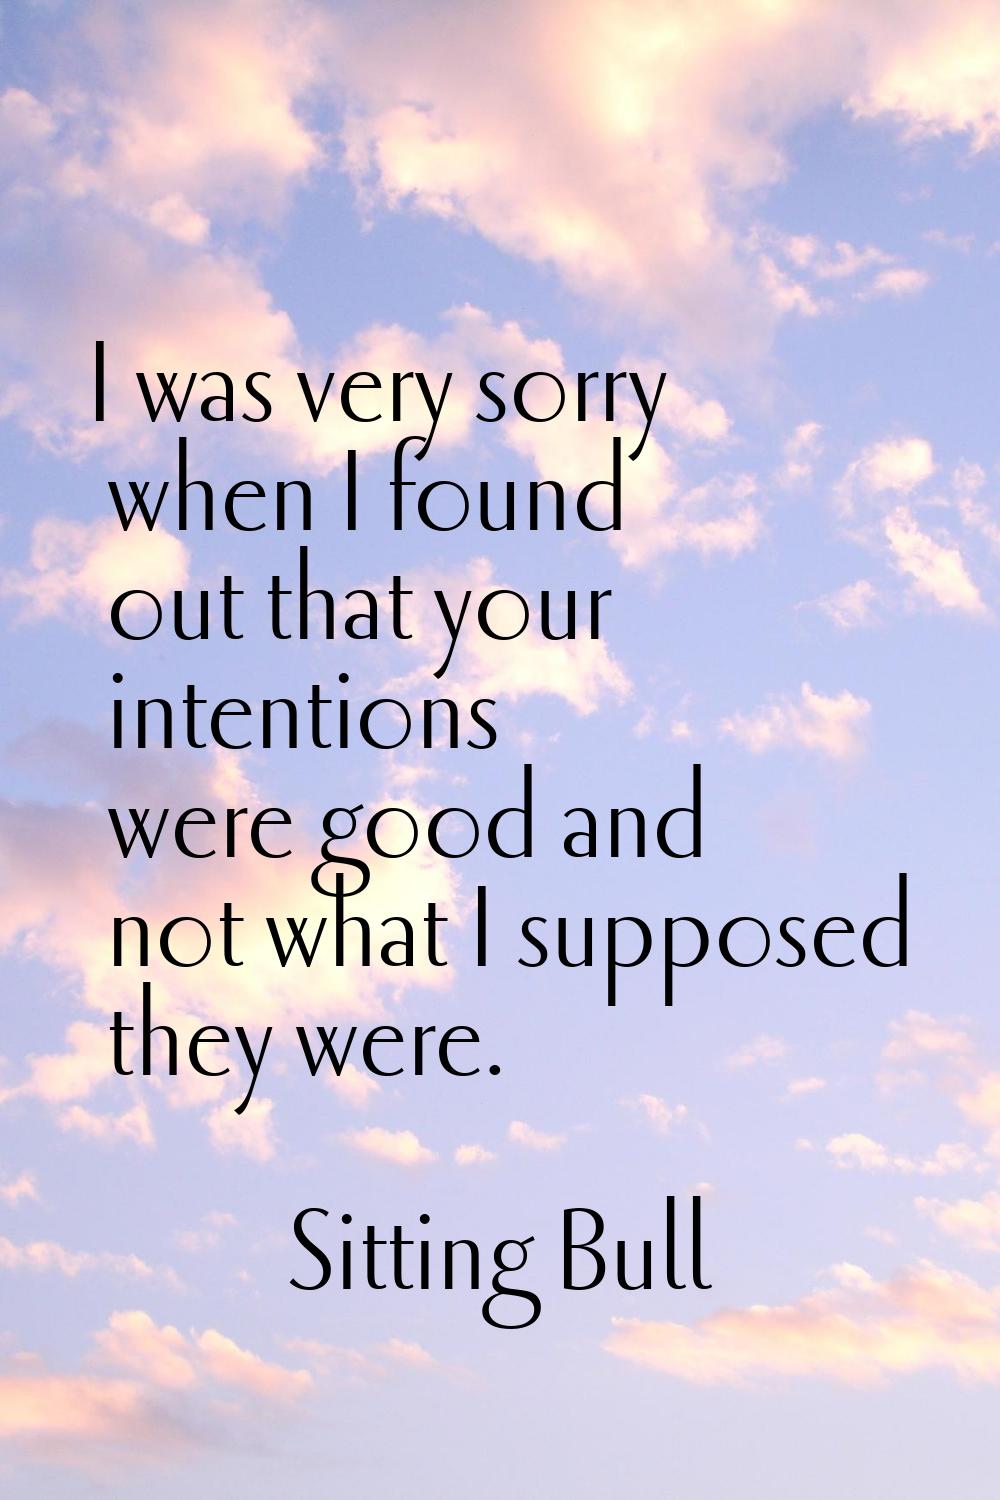 I was very sorry when I found out that your intentions were good and not what I supposed they were.